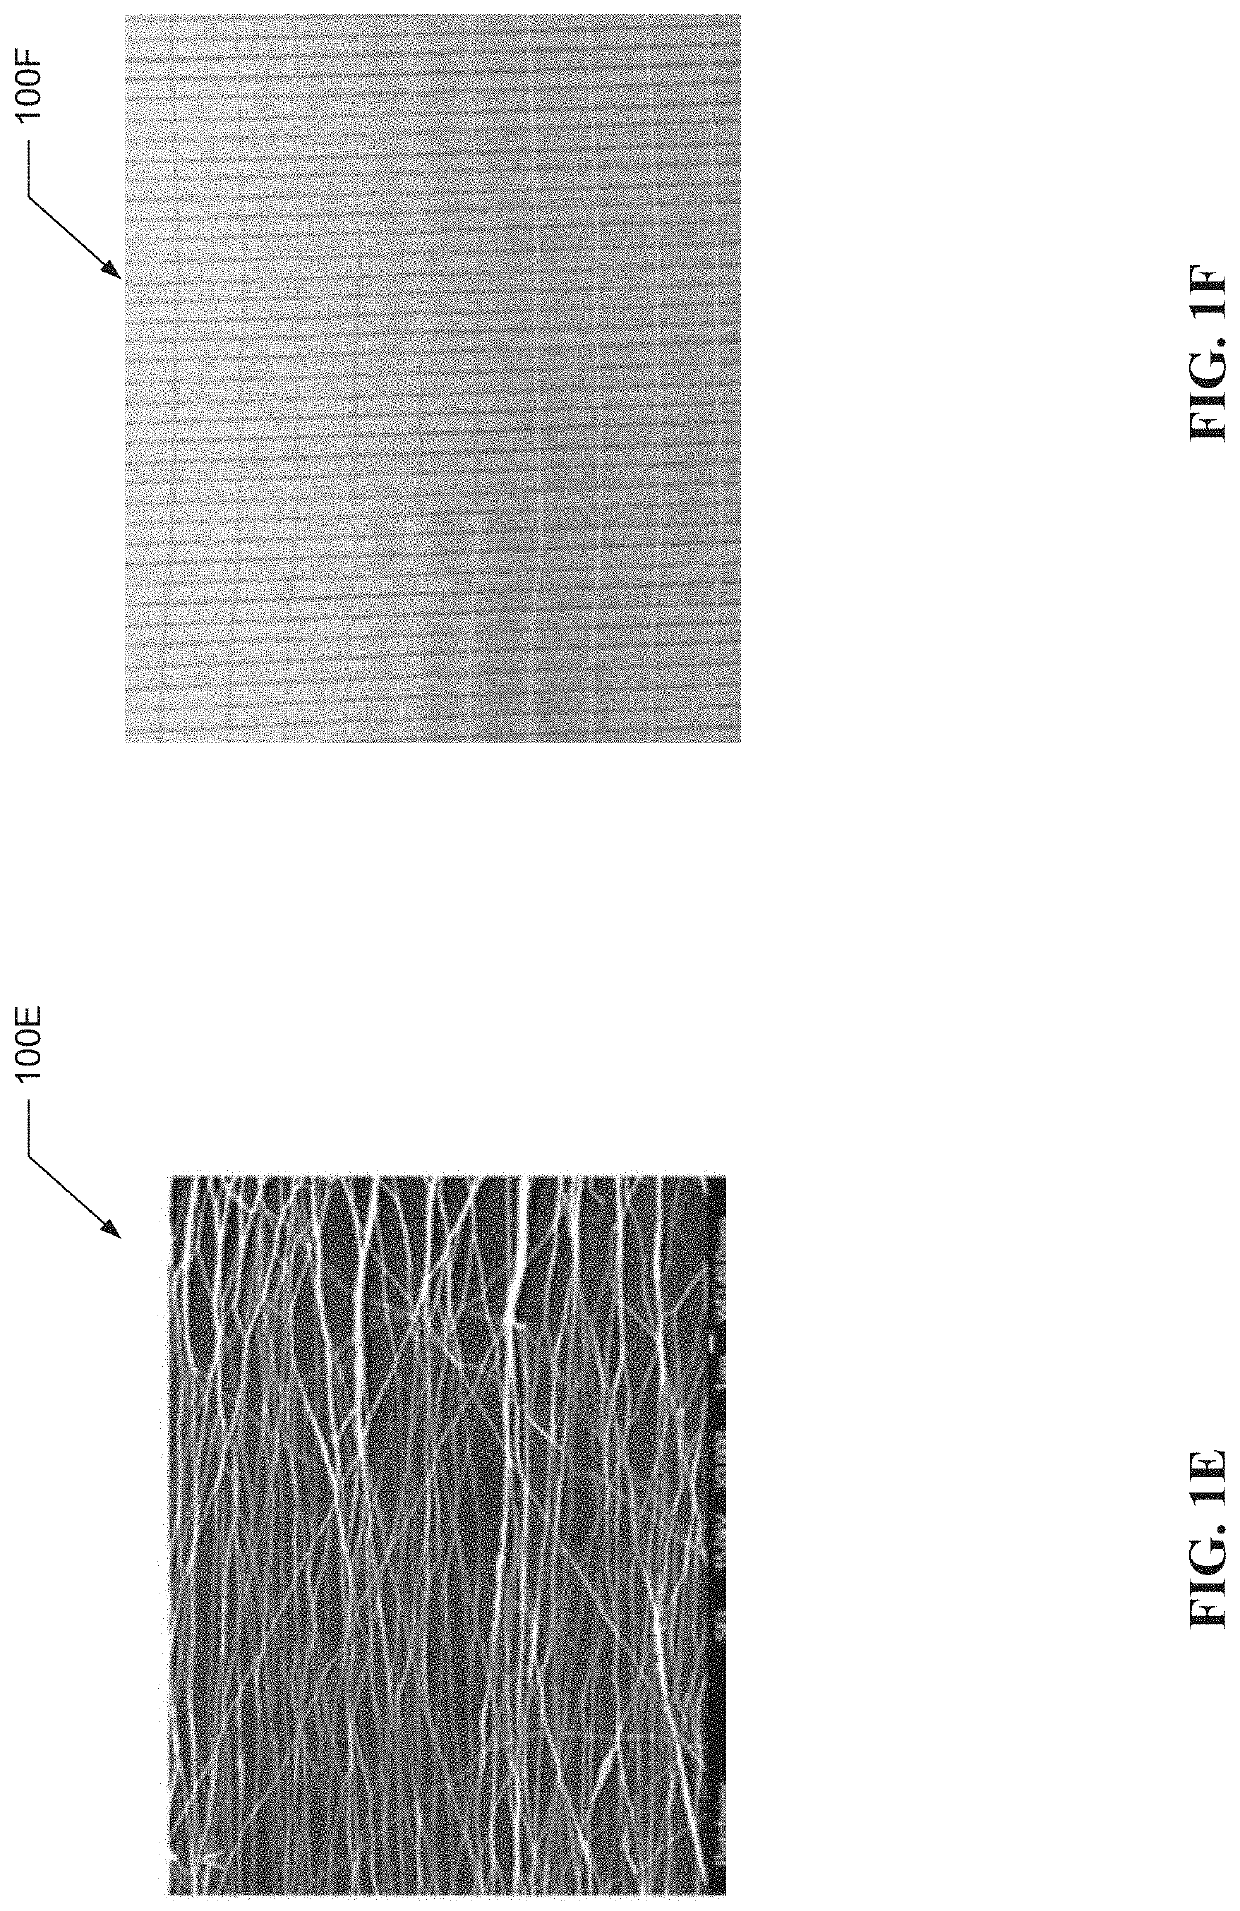 Uniaxially-aligned nanofiber scaffolds and methods for producing and using same